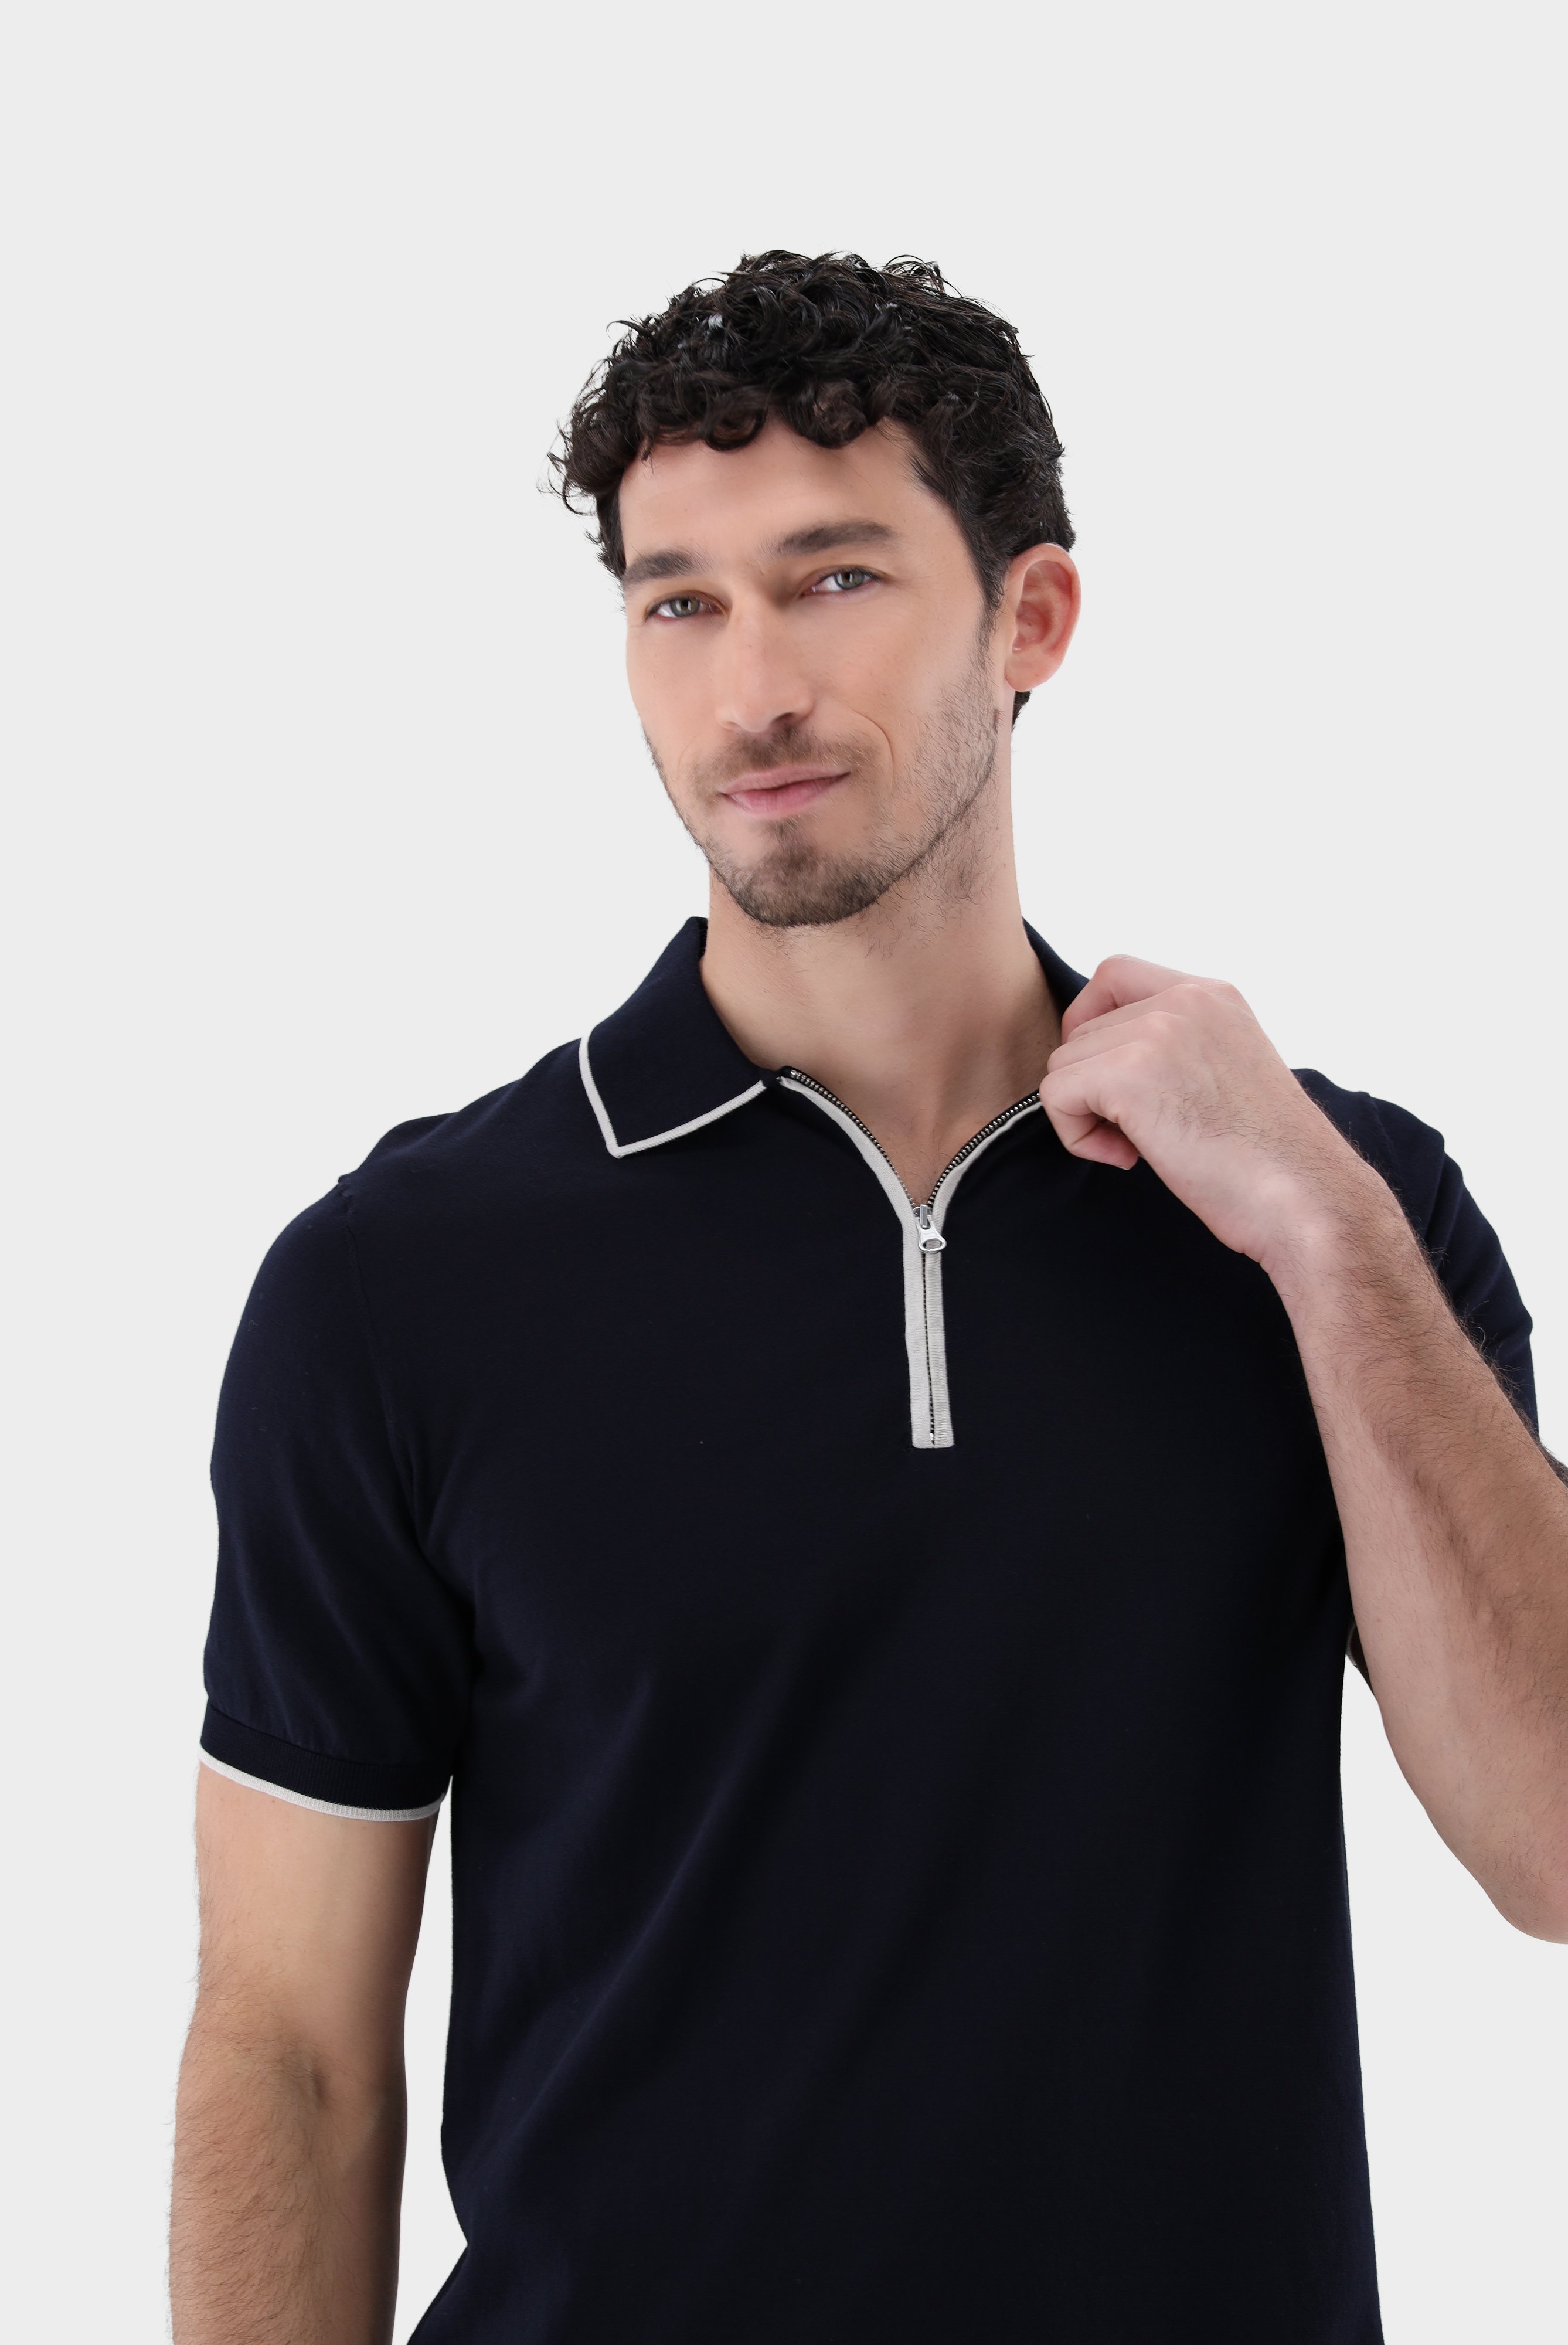 Poloshirts+Zip Knit-Polo in Air Cotton+82.8647.S7.S00174.795.S